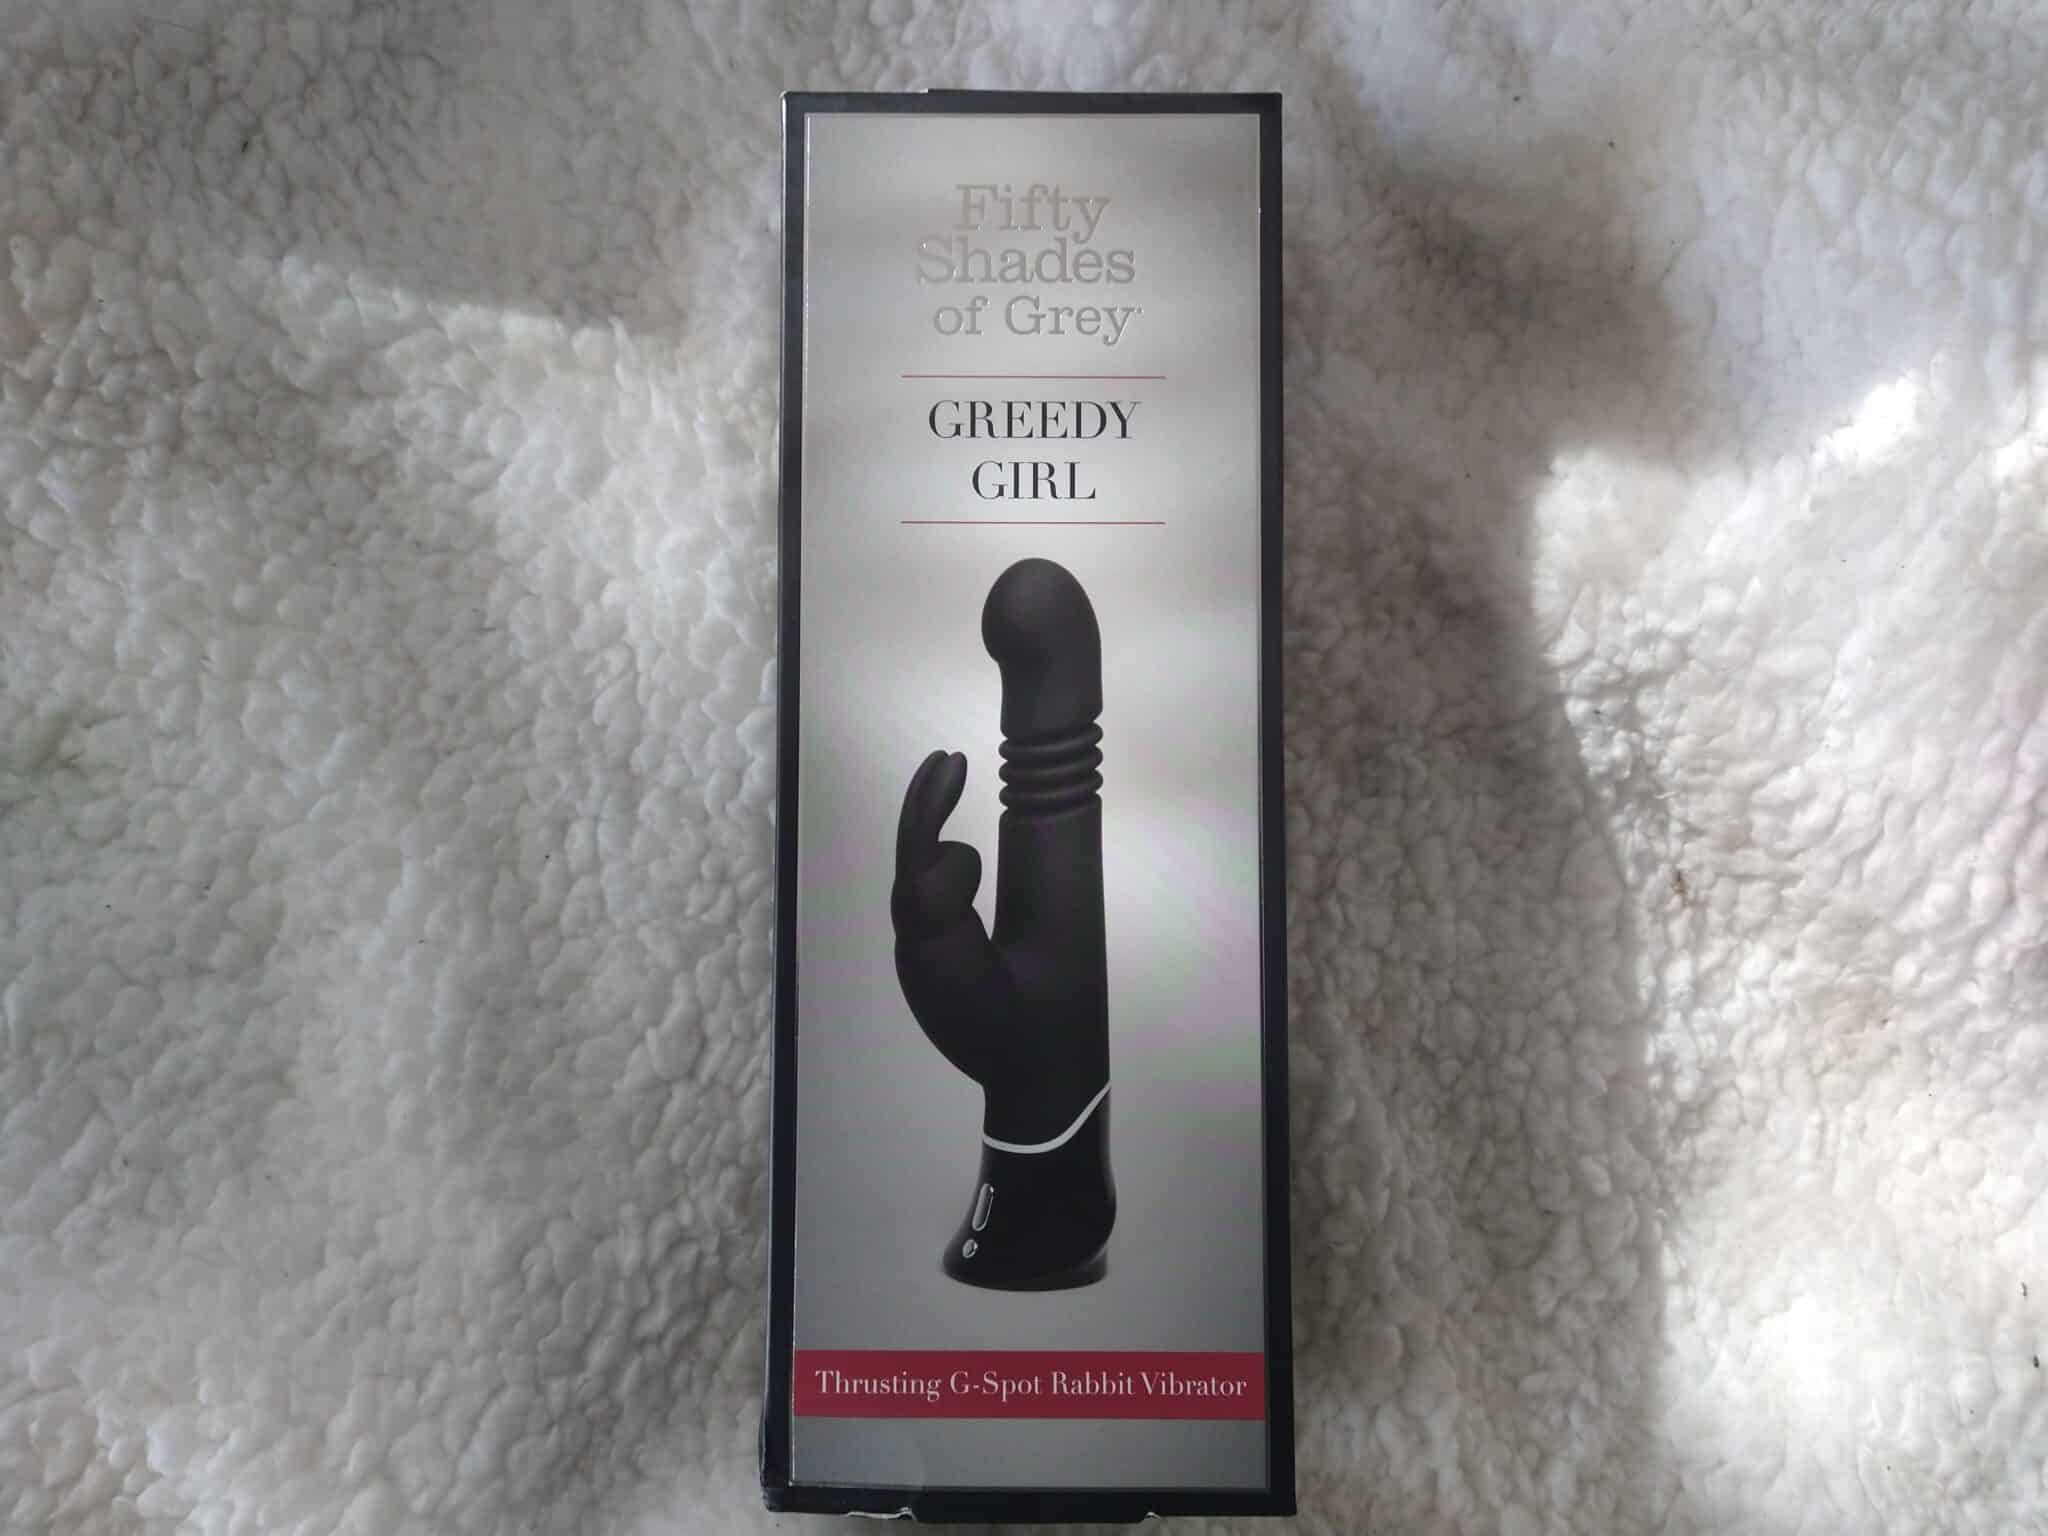 Fifty Shades of Grey Greedy Girl Thrusting Rabbit Vibrator Packaging: A Testament to Quality?